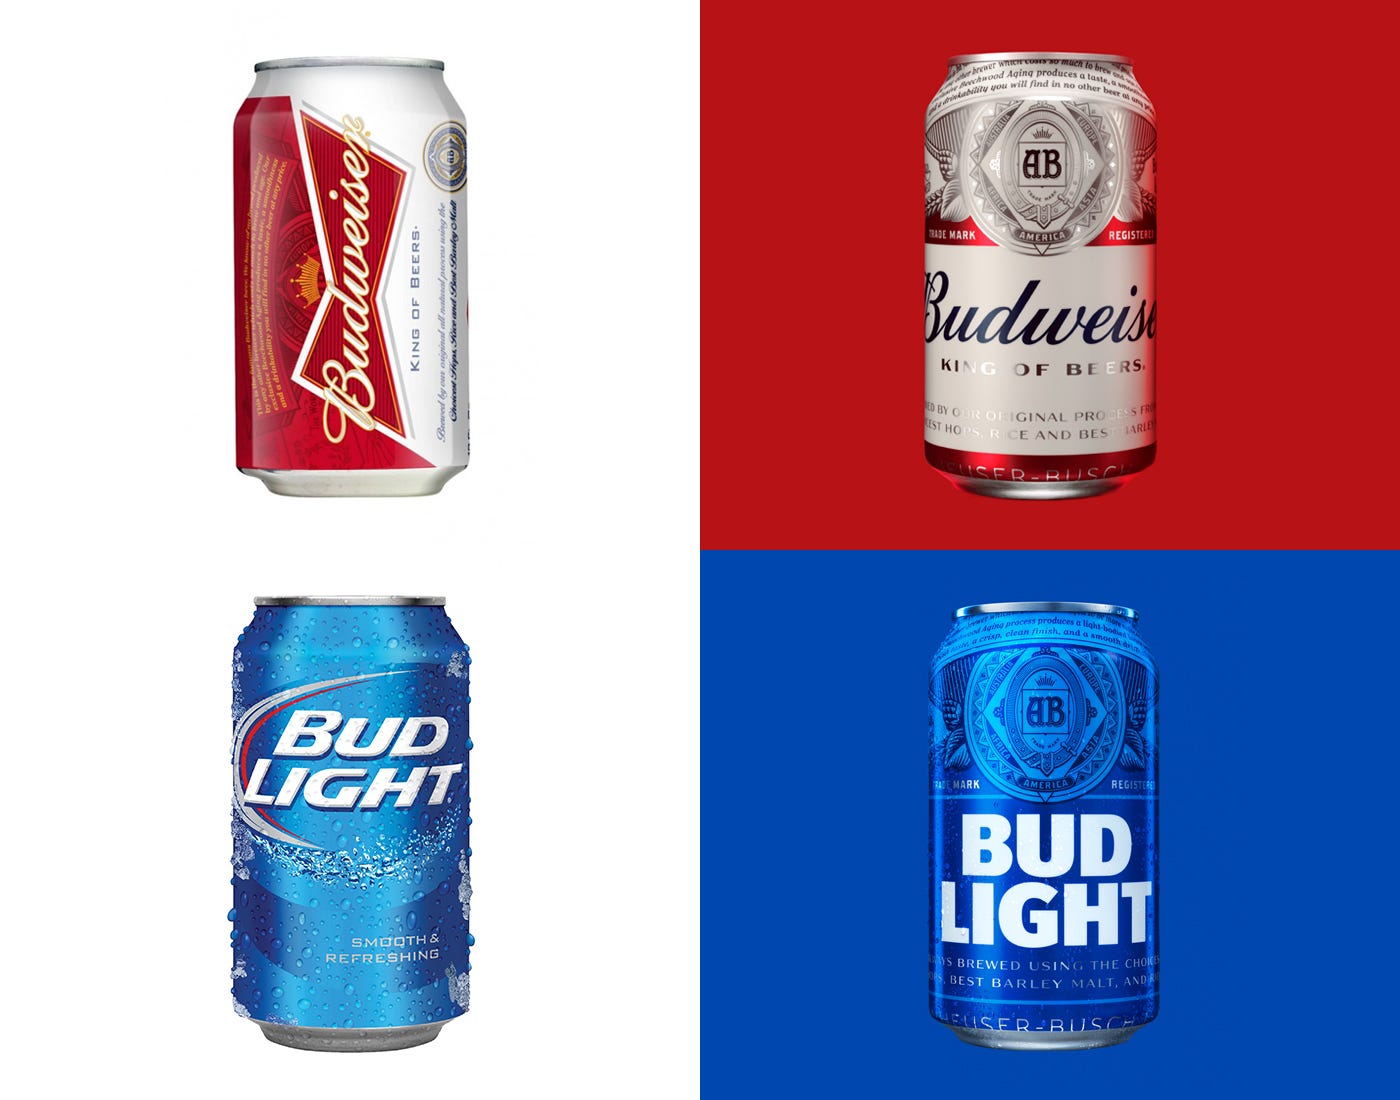 The Kings of Beer and Branding. How Budweiser and Bud Light Redefined… | by  Matt Knorr | Look and Logo | Medium